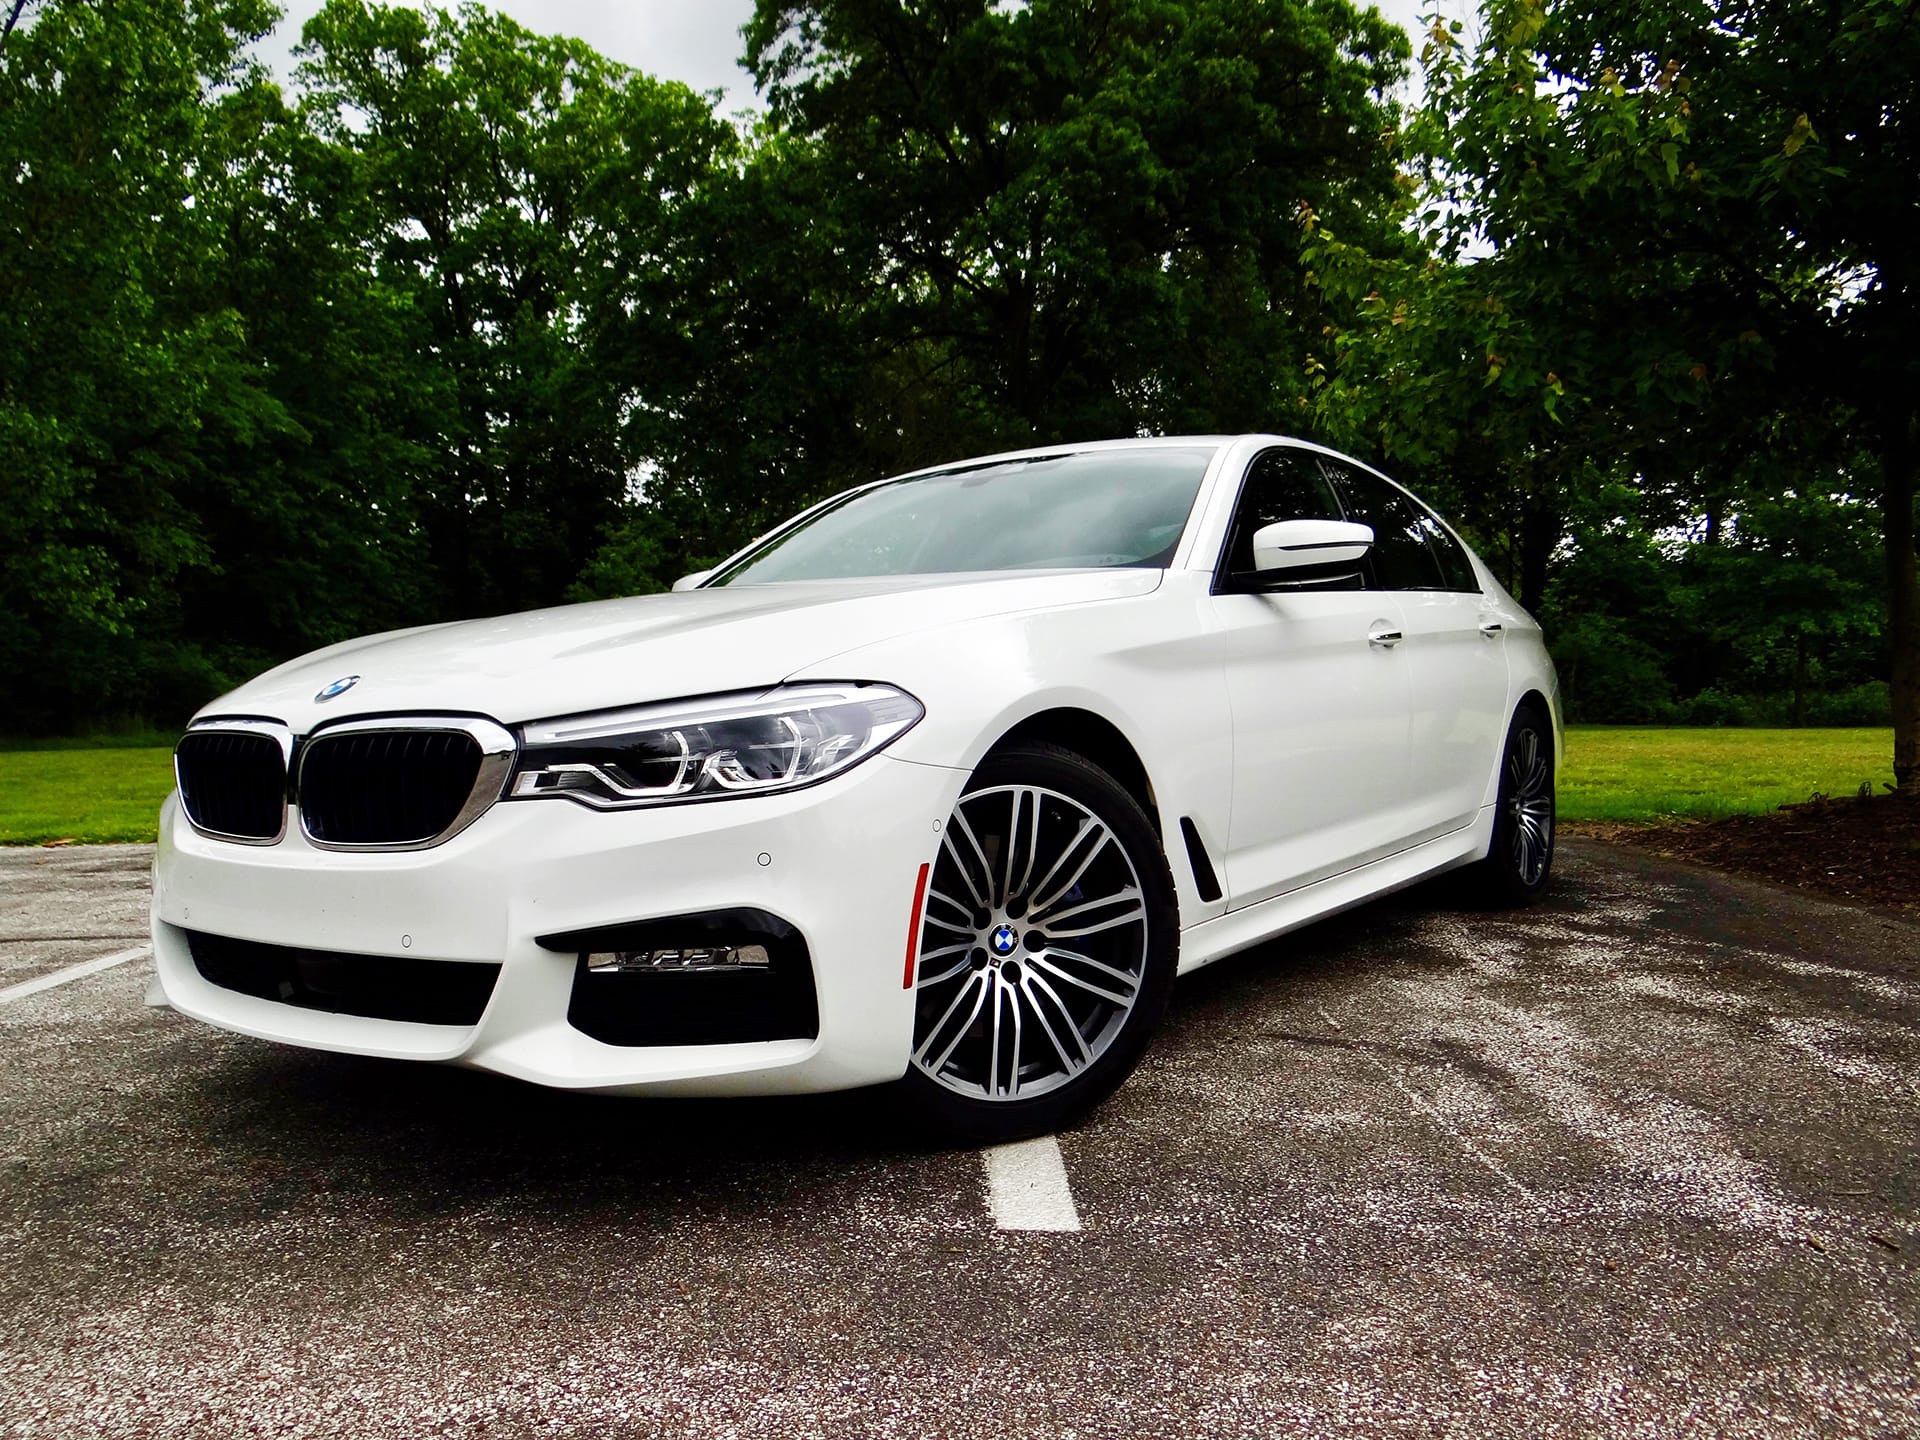 BMW 530i review: The best car I've ever driven